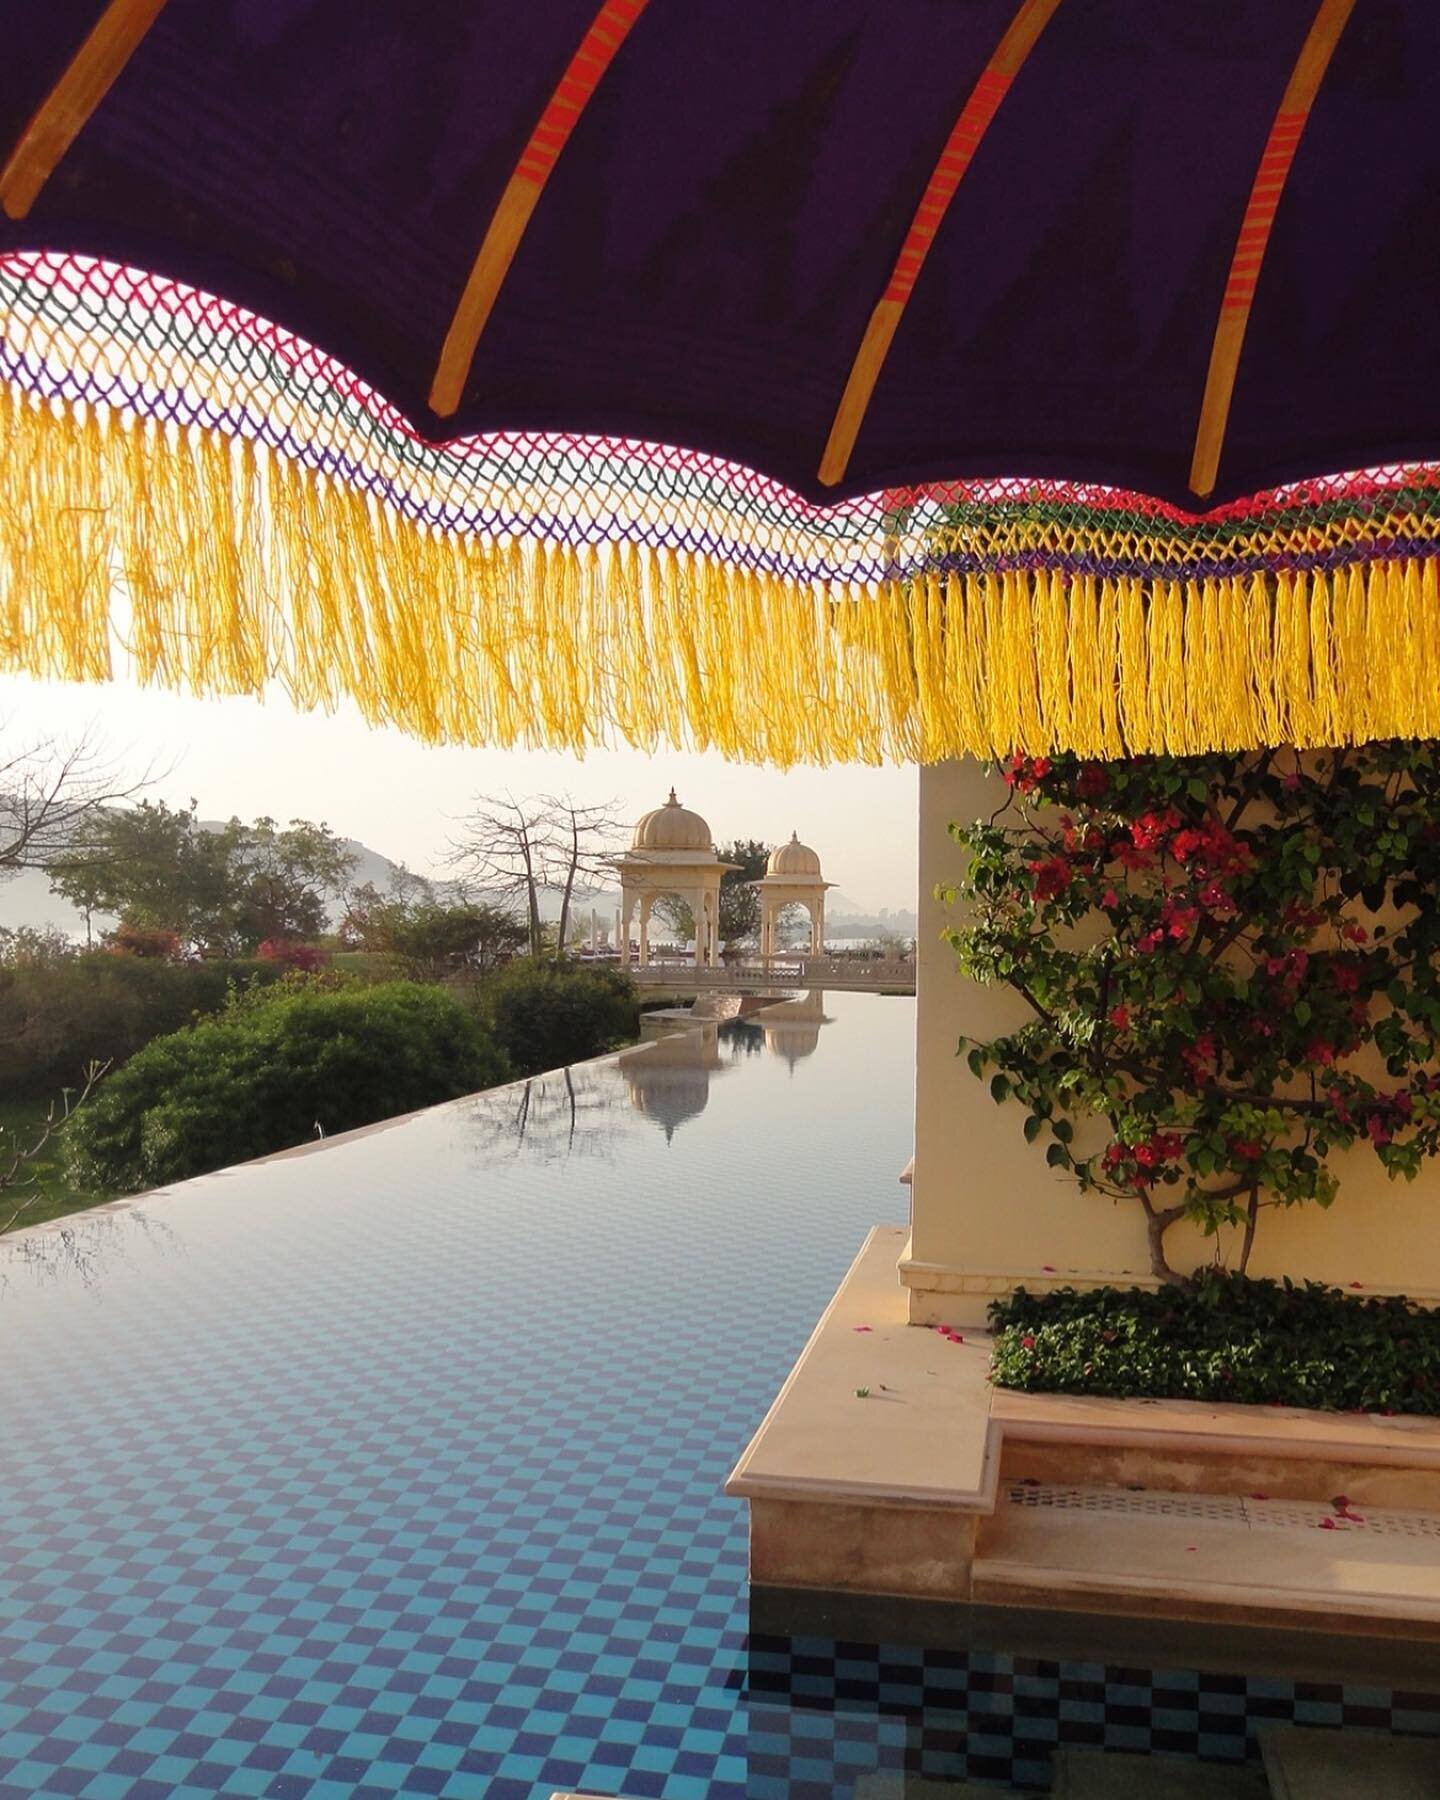 Udaipur, India, it&rsquo;s been way too long. Time to return! #pooldesign #blue #umbrellas  #textilesofindia #buying trips #lakepichola